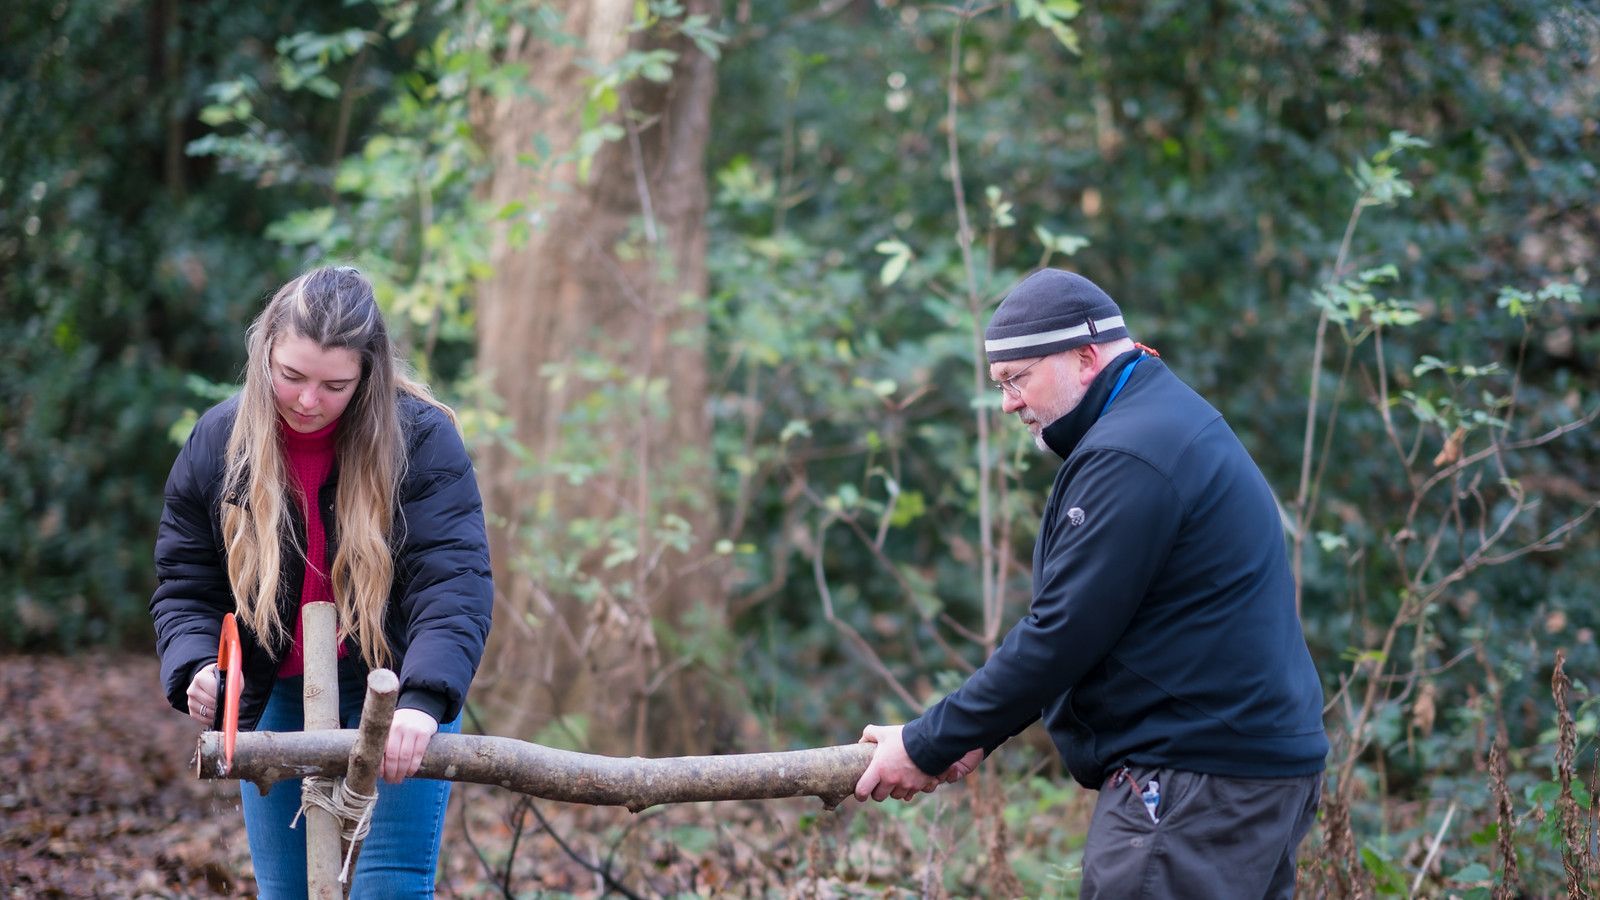 Queen Margaret University’s lecturer in initial teacher education, Patrick Boxall, teaches Eilidh Fleming, BA (Hons) Education Studies (Primary), some woodlands skills.